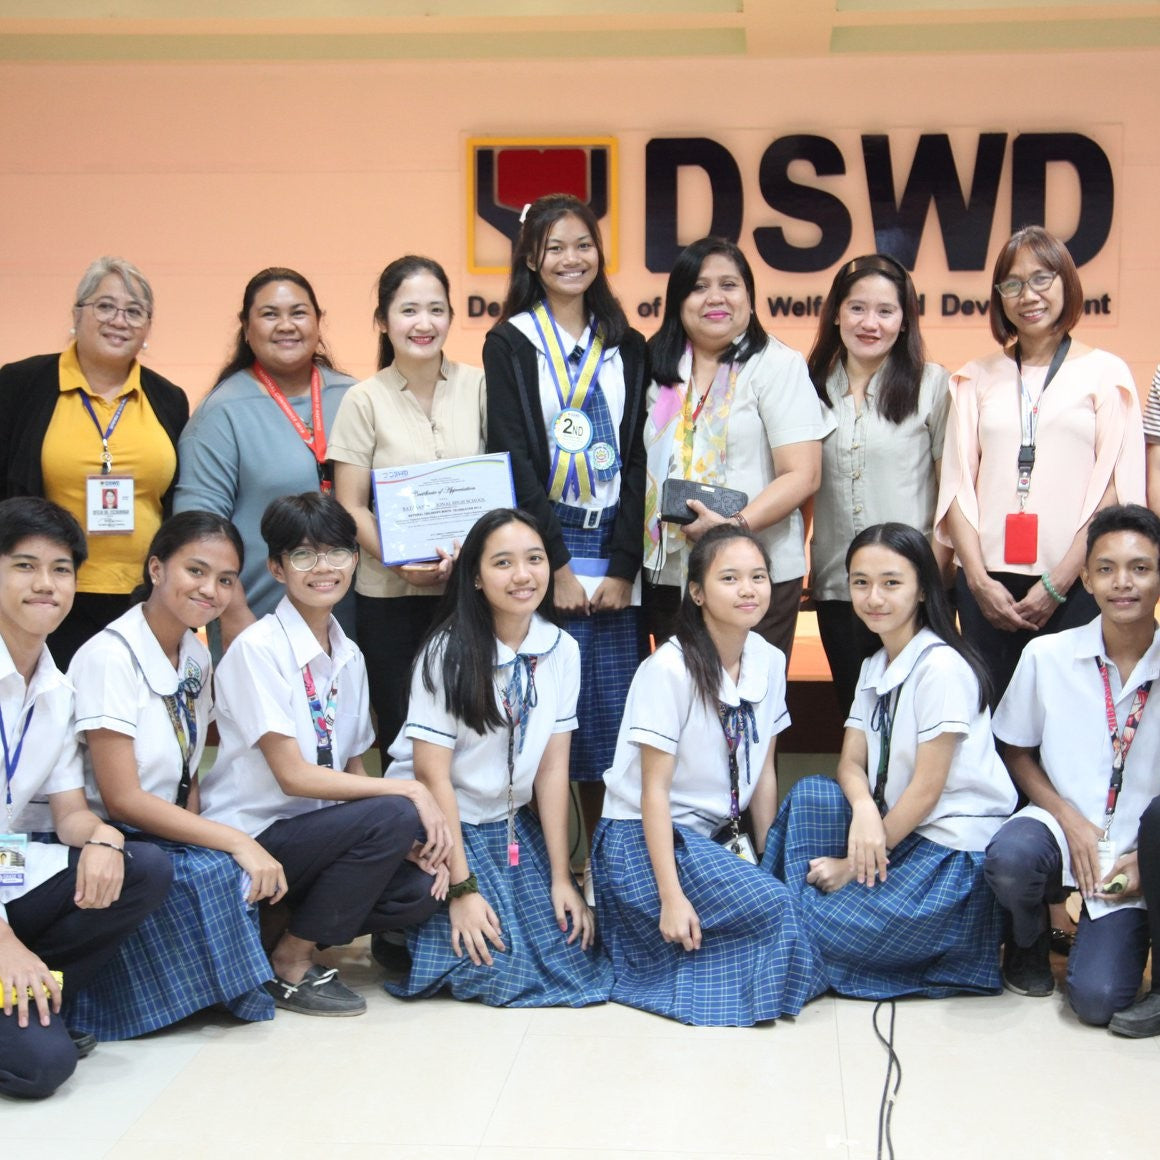 Department Of Social Welfare And Development (DSWD)